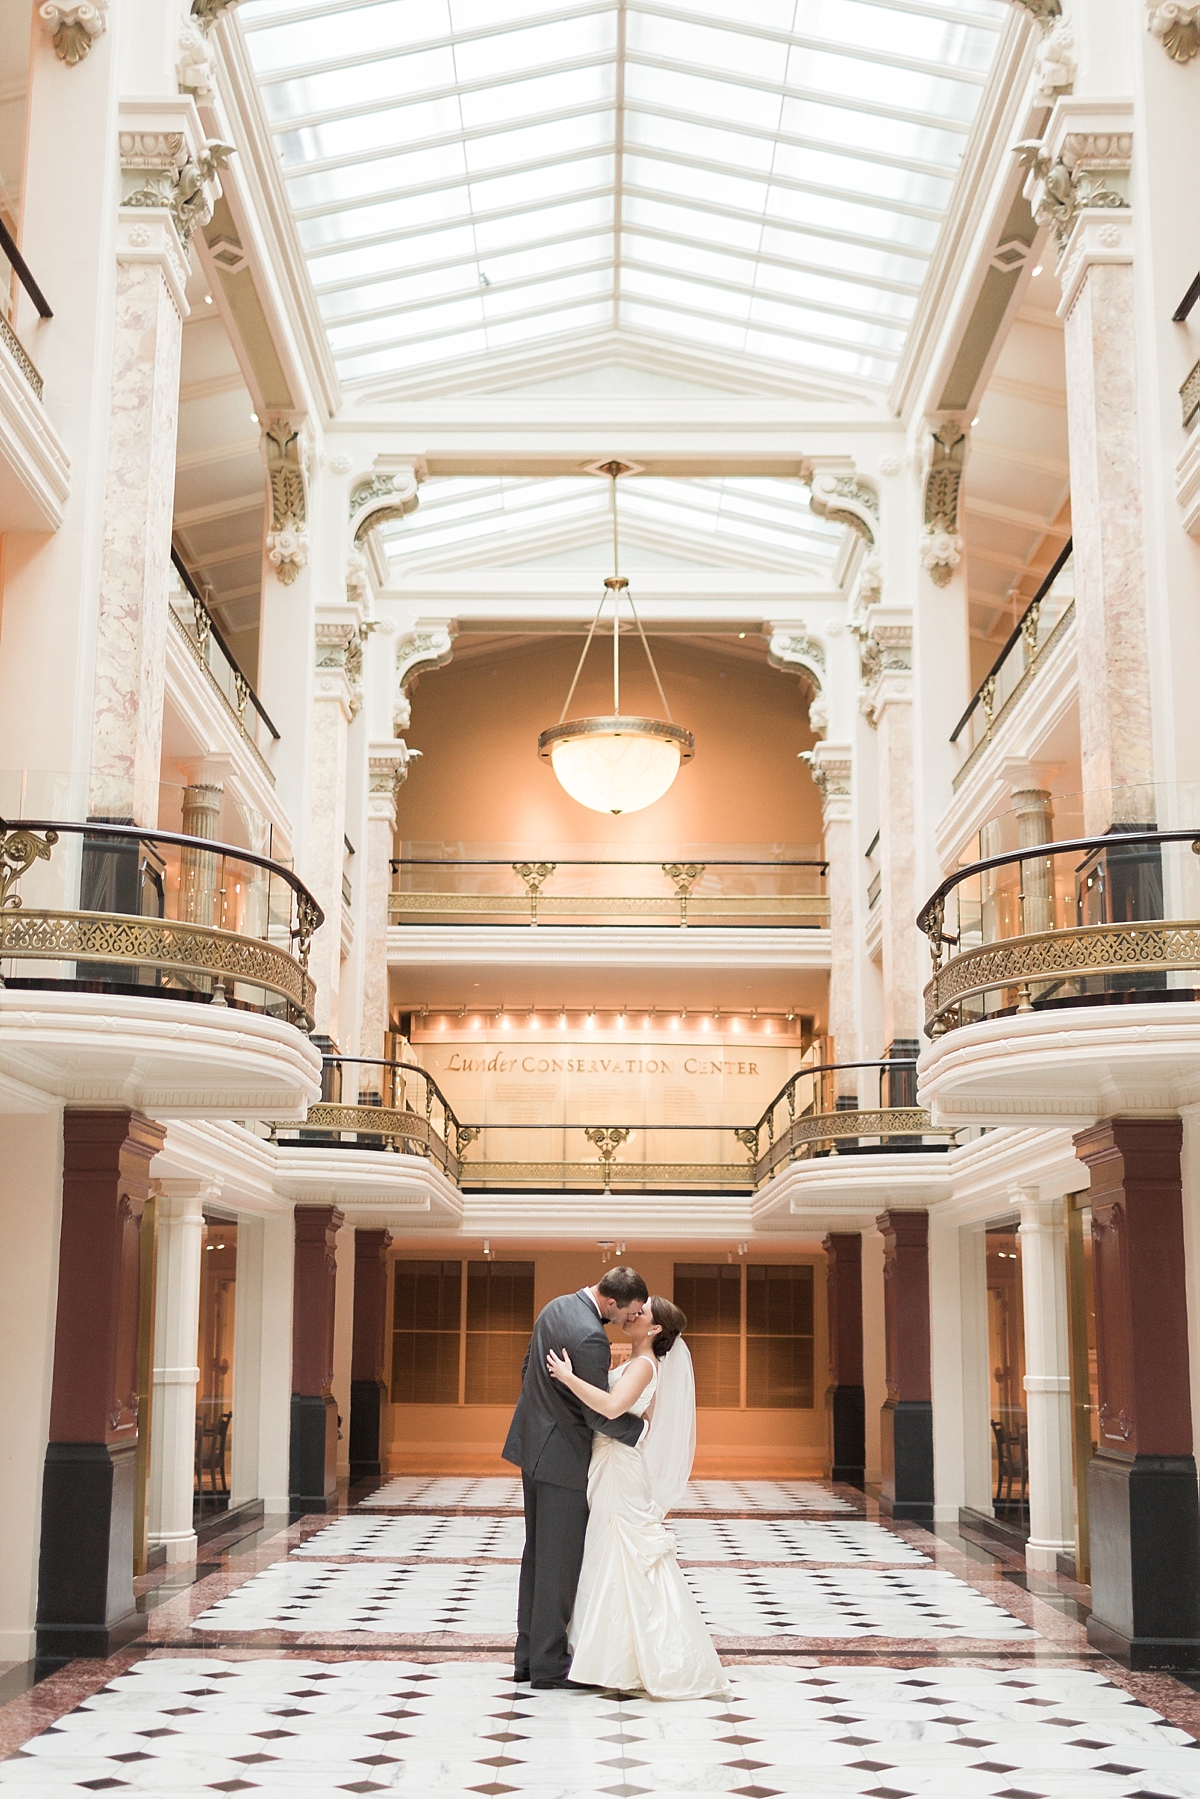 A Washington, DC wedding photographer explains three reasons why it's not a bad thing if a photographer hasn't previously worked at your venue!